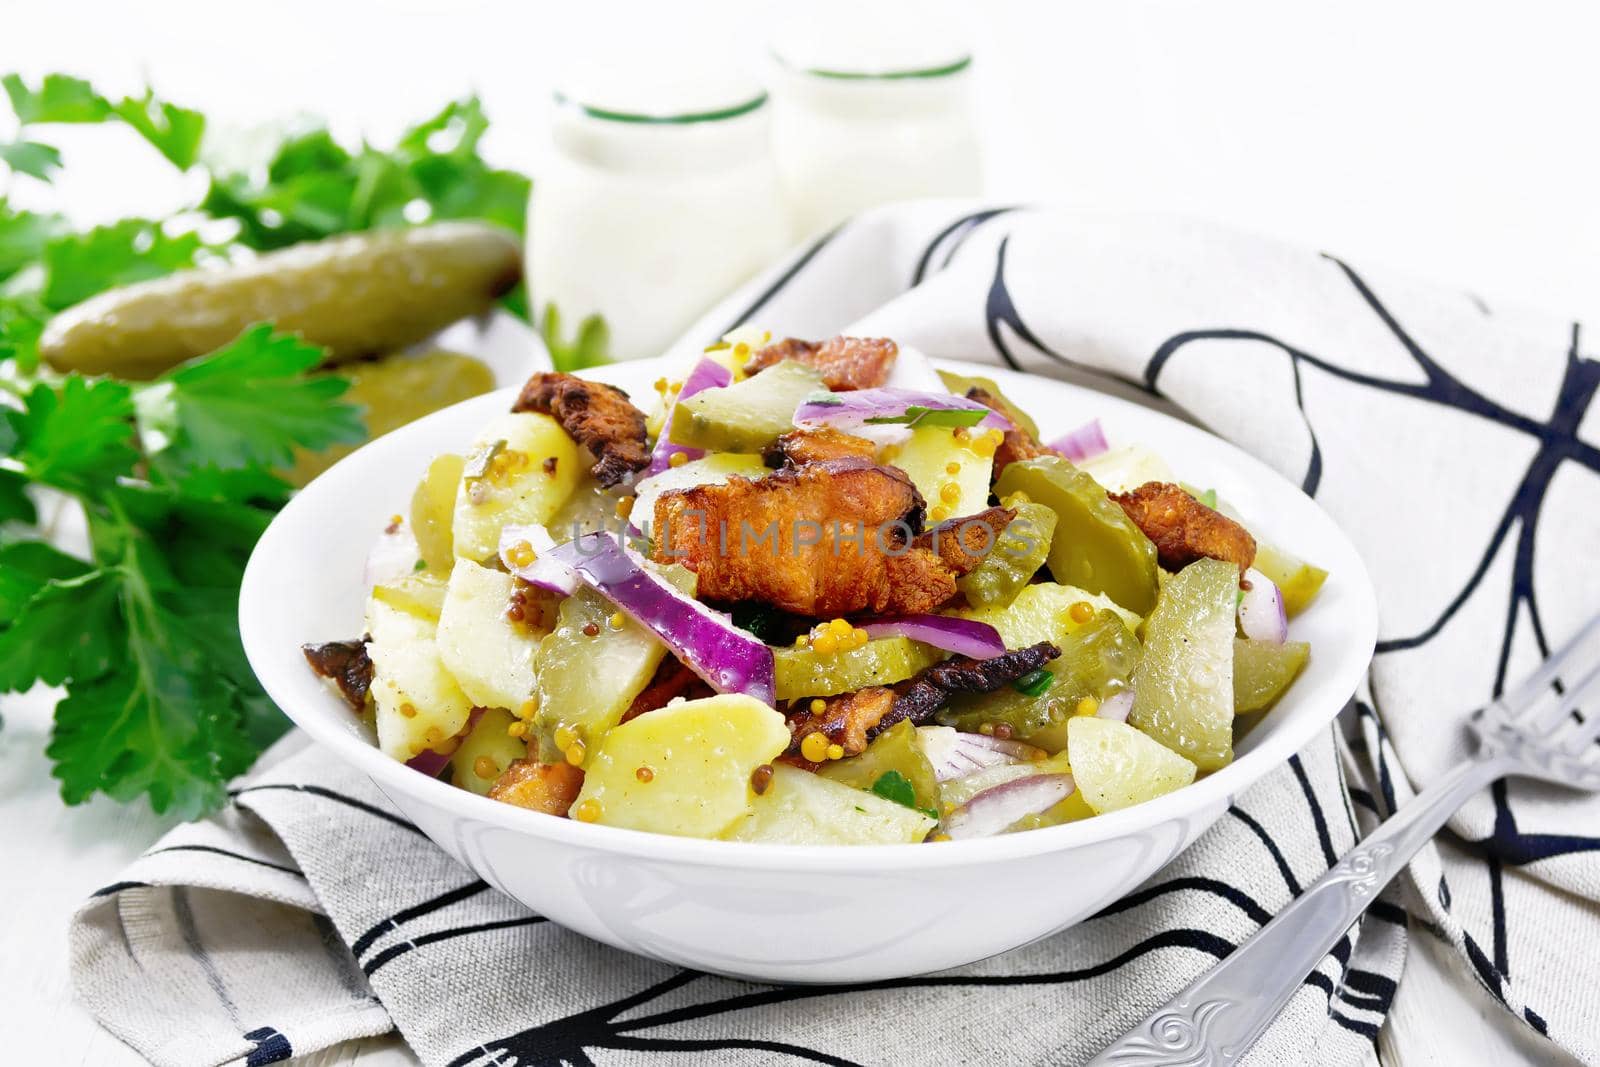 Salad of boiled potatoes, fried bacon, red onions and pickled cucumbers, seasoned with grain mustard, spices and vegetable oil in a plate on a napkin against white wooden board background